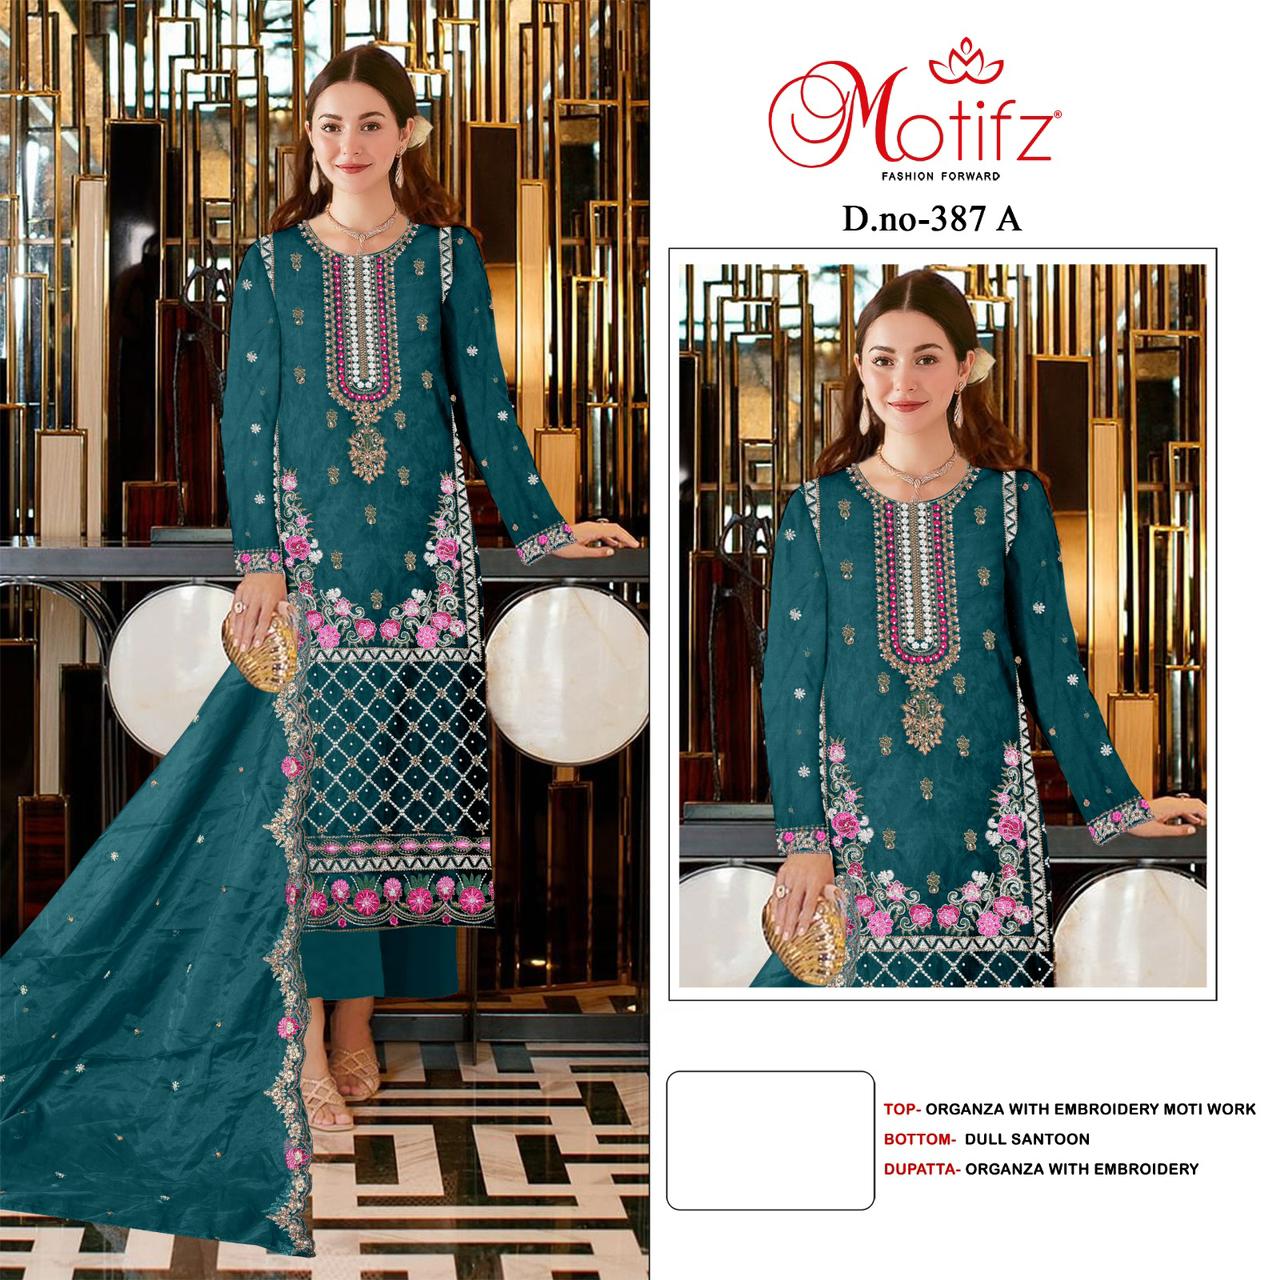 MOTIFZ 387 A PAKISTANI SUITS IN INDIA